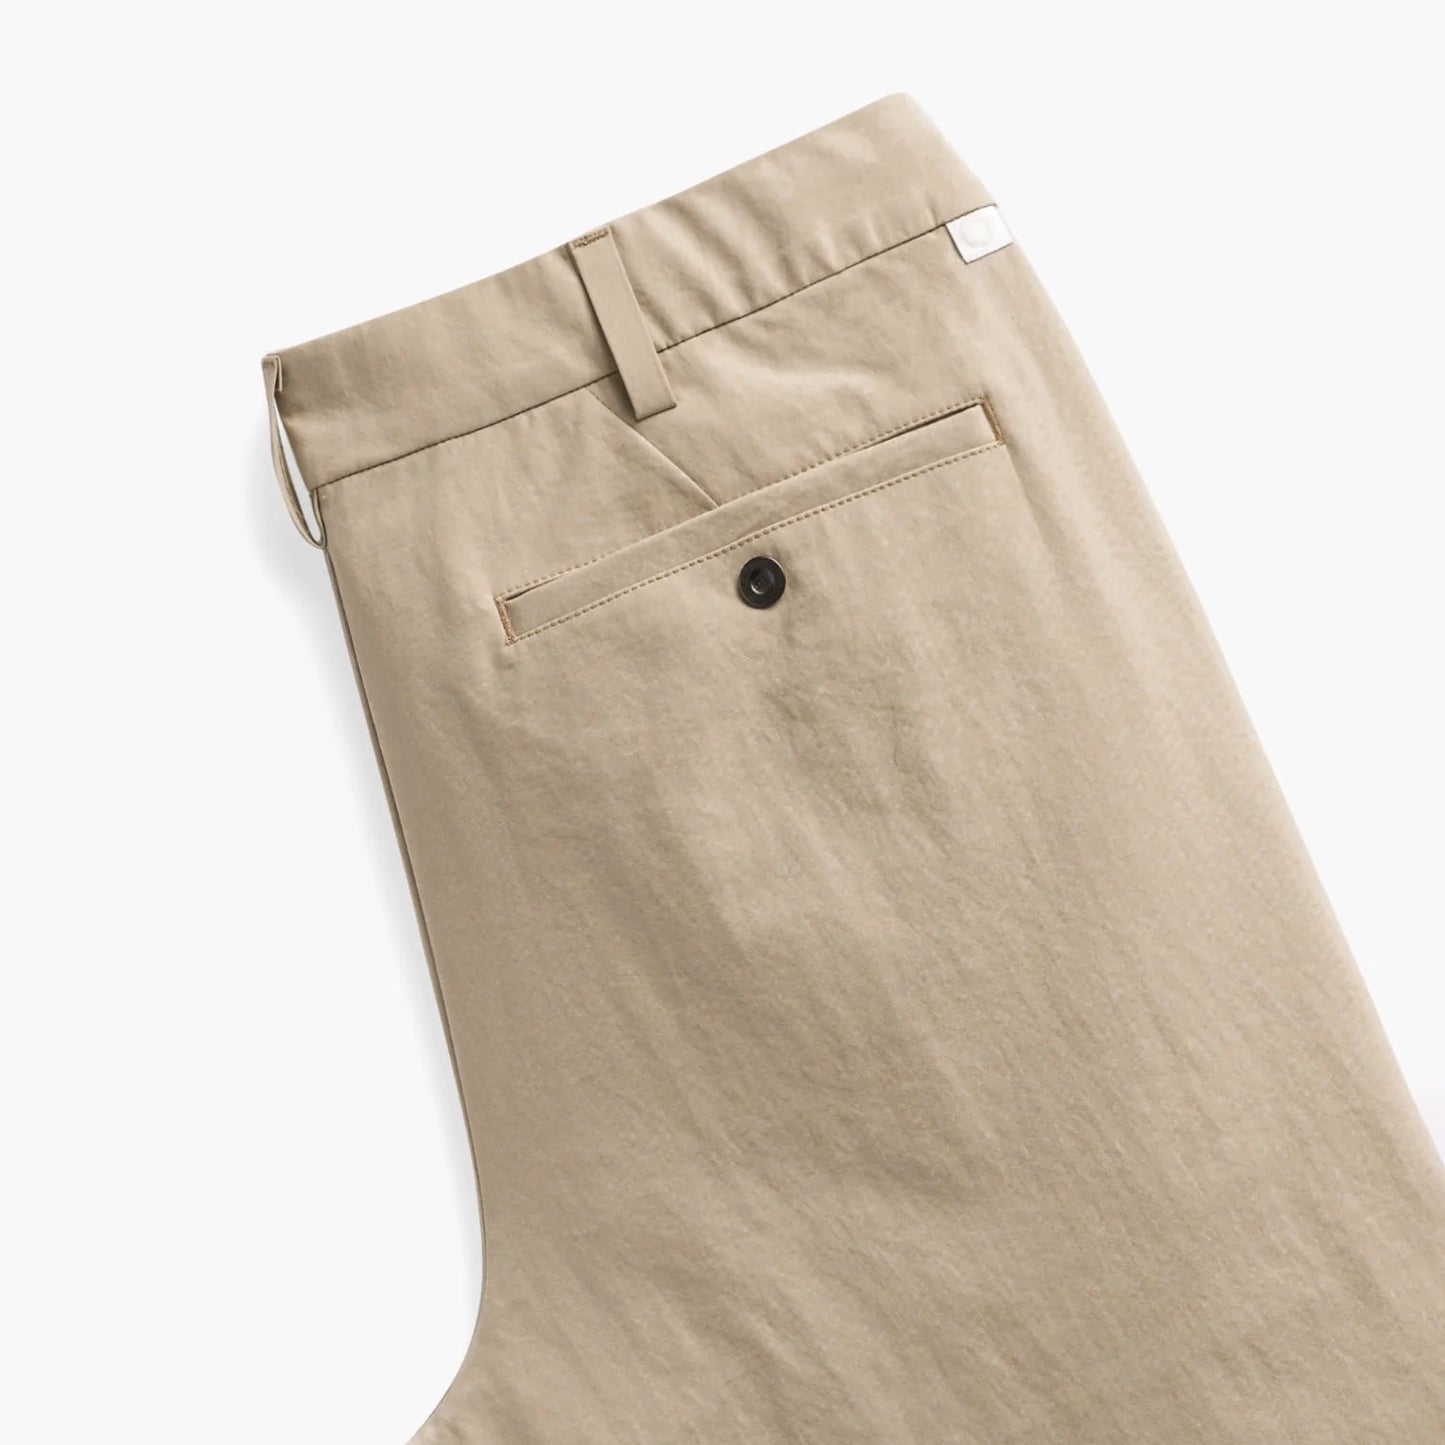 MINISTRY OF SUPPLY PACE POPLIN CHINO IN BRITISH TAN